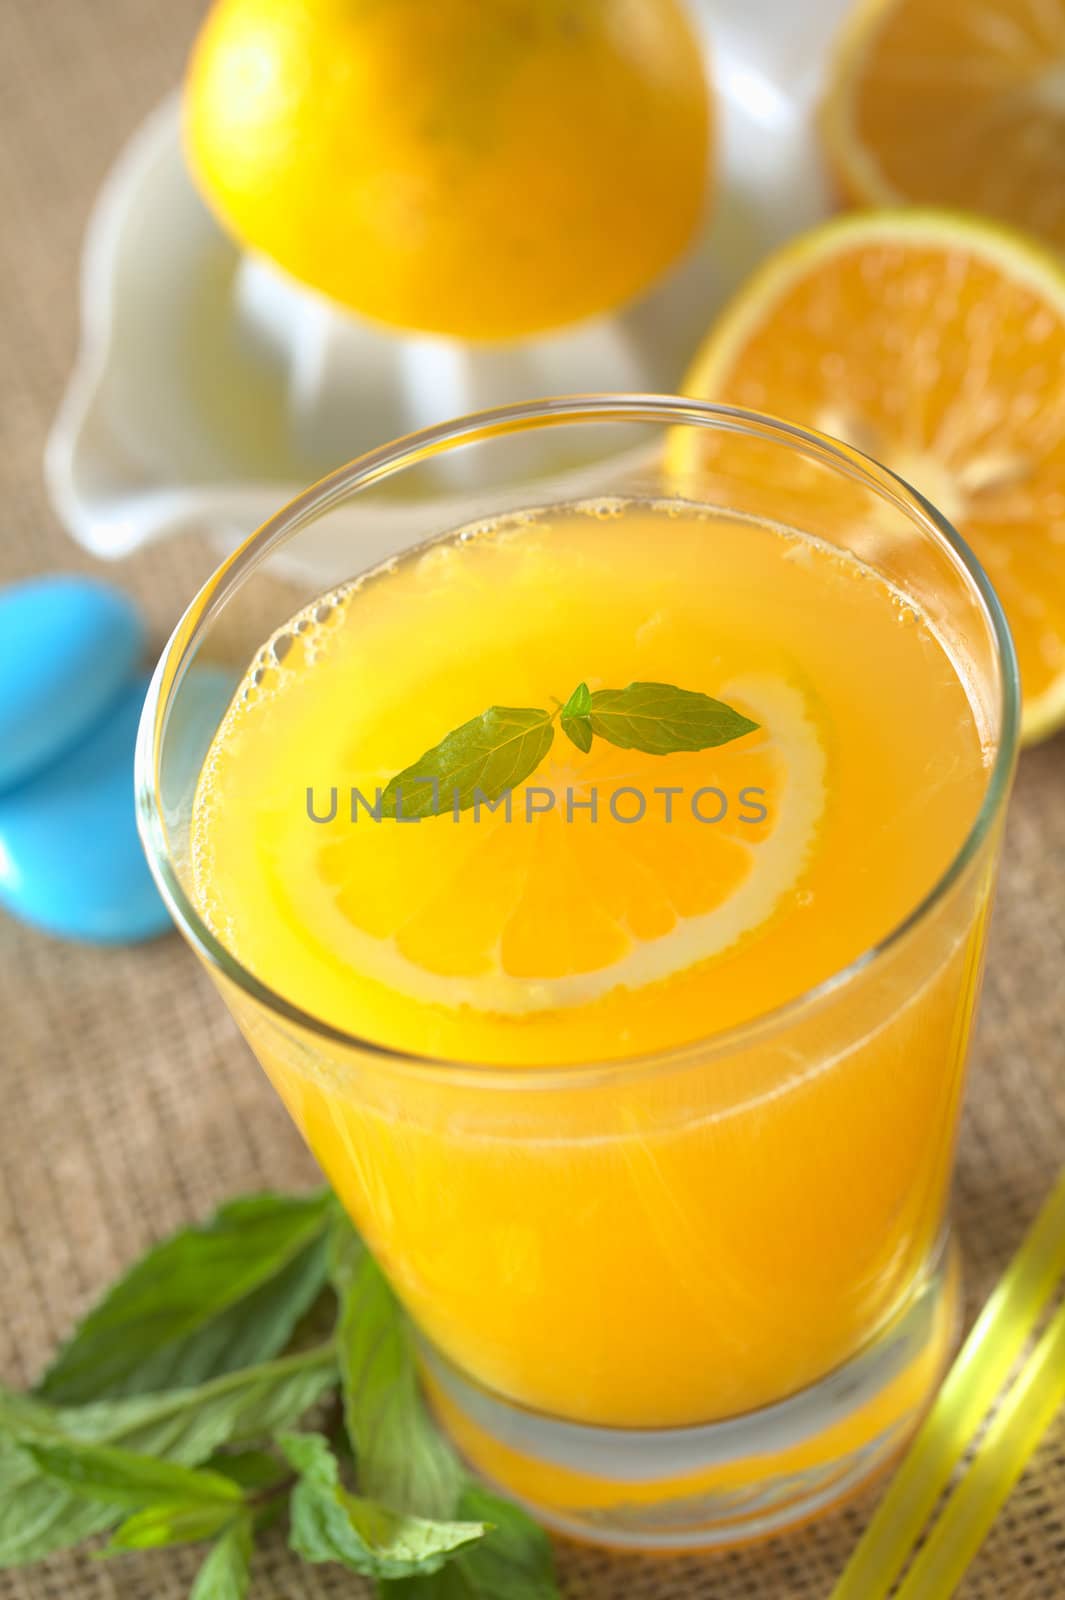 Freshly squeezed orange juice with orange slice and mint on top of the juice (Selective Focus, Focus on the mint leaf on the juice)